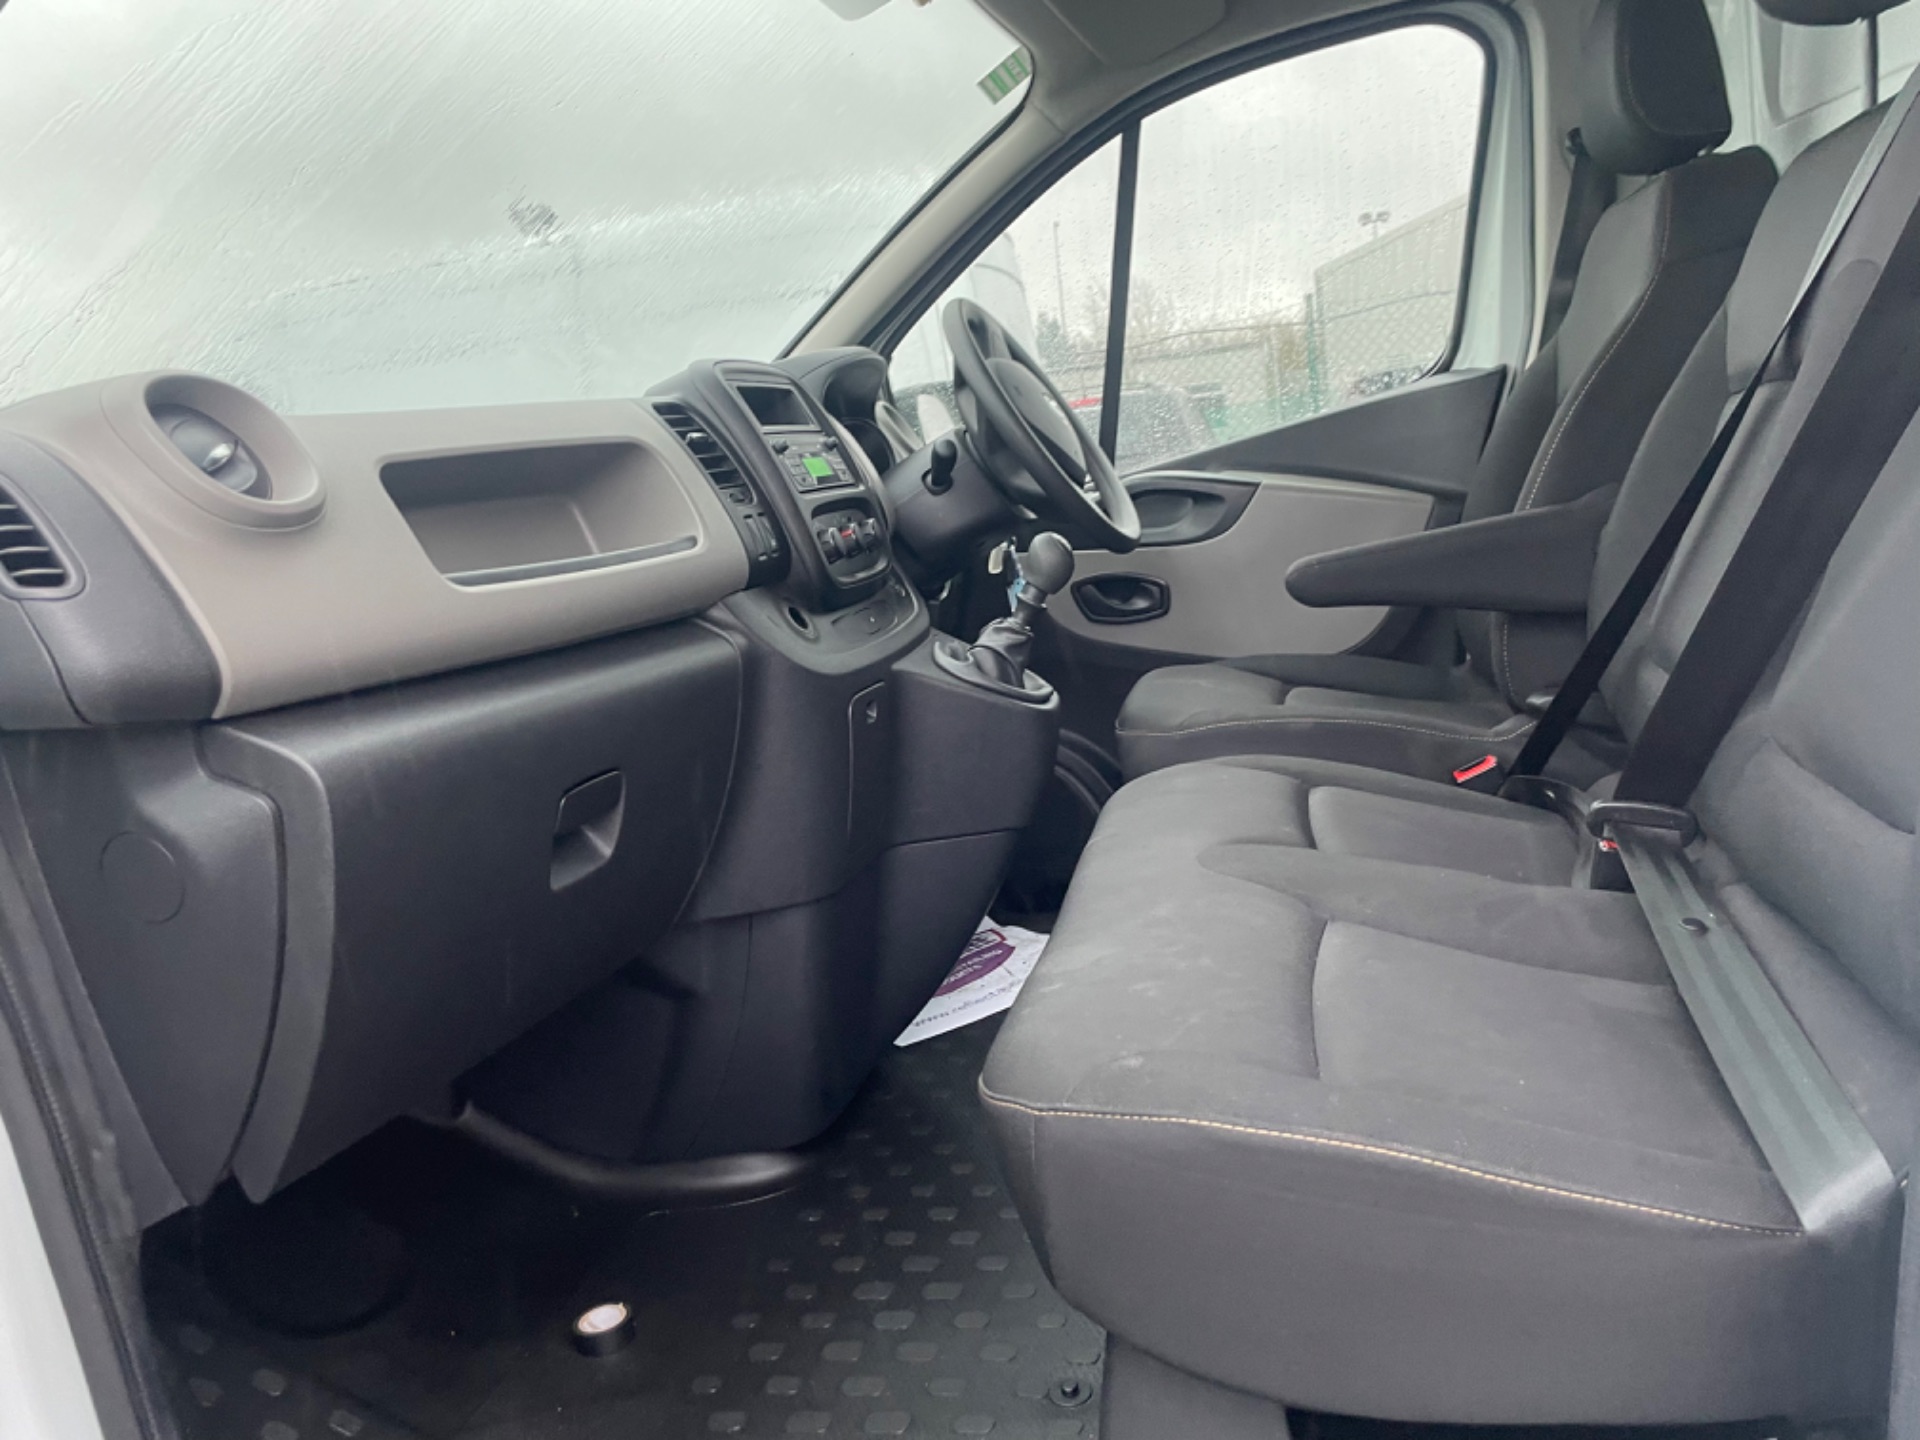 2019 Renault Trafic LL29 DCI 120 Business (191D31613) Thumbnail 11